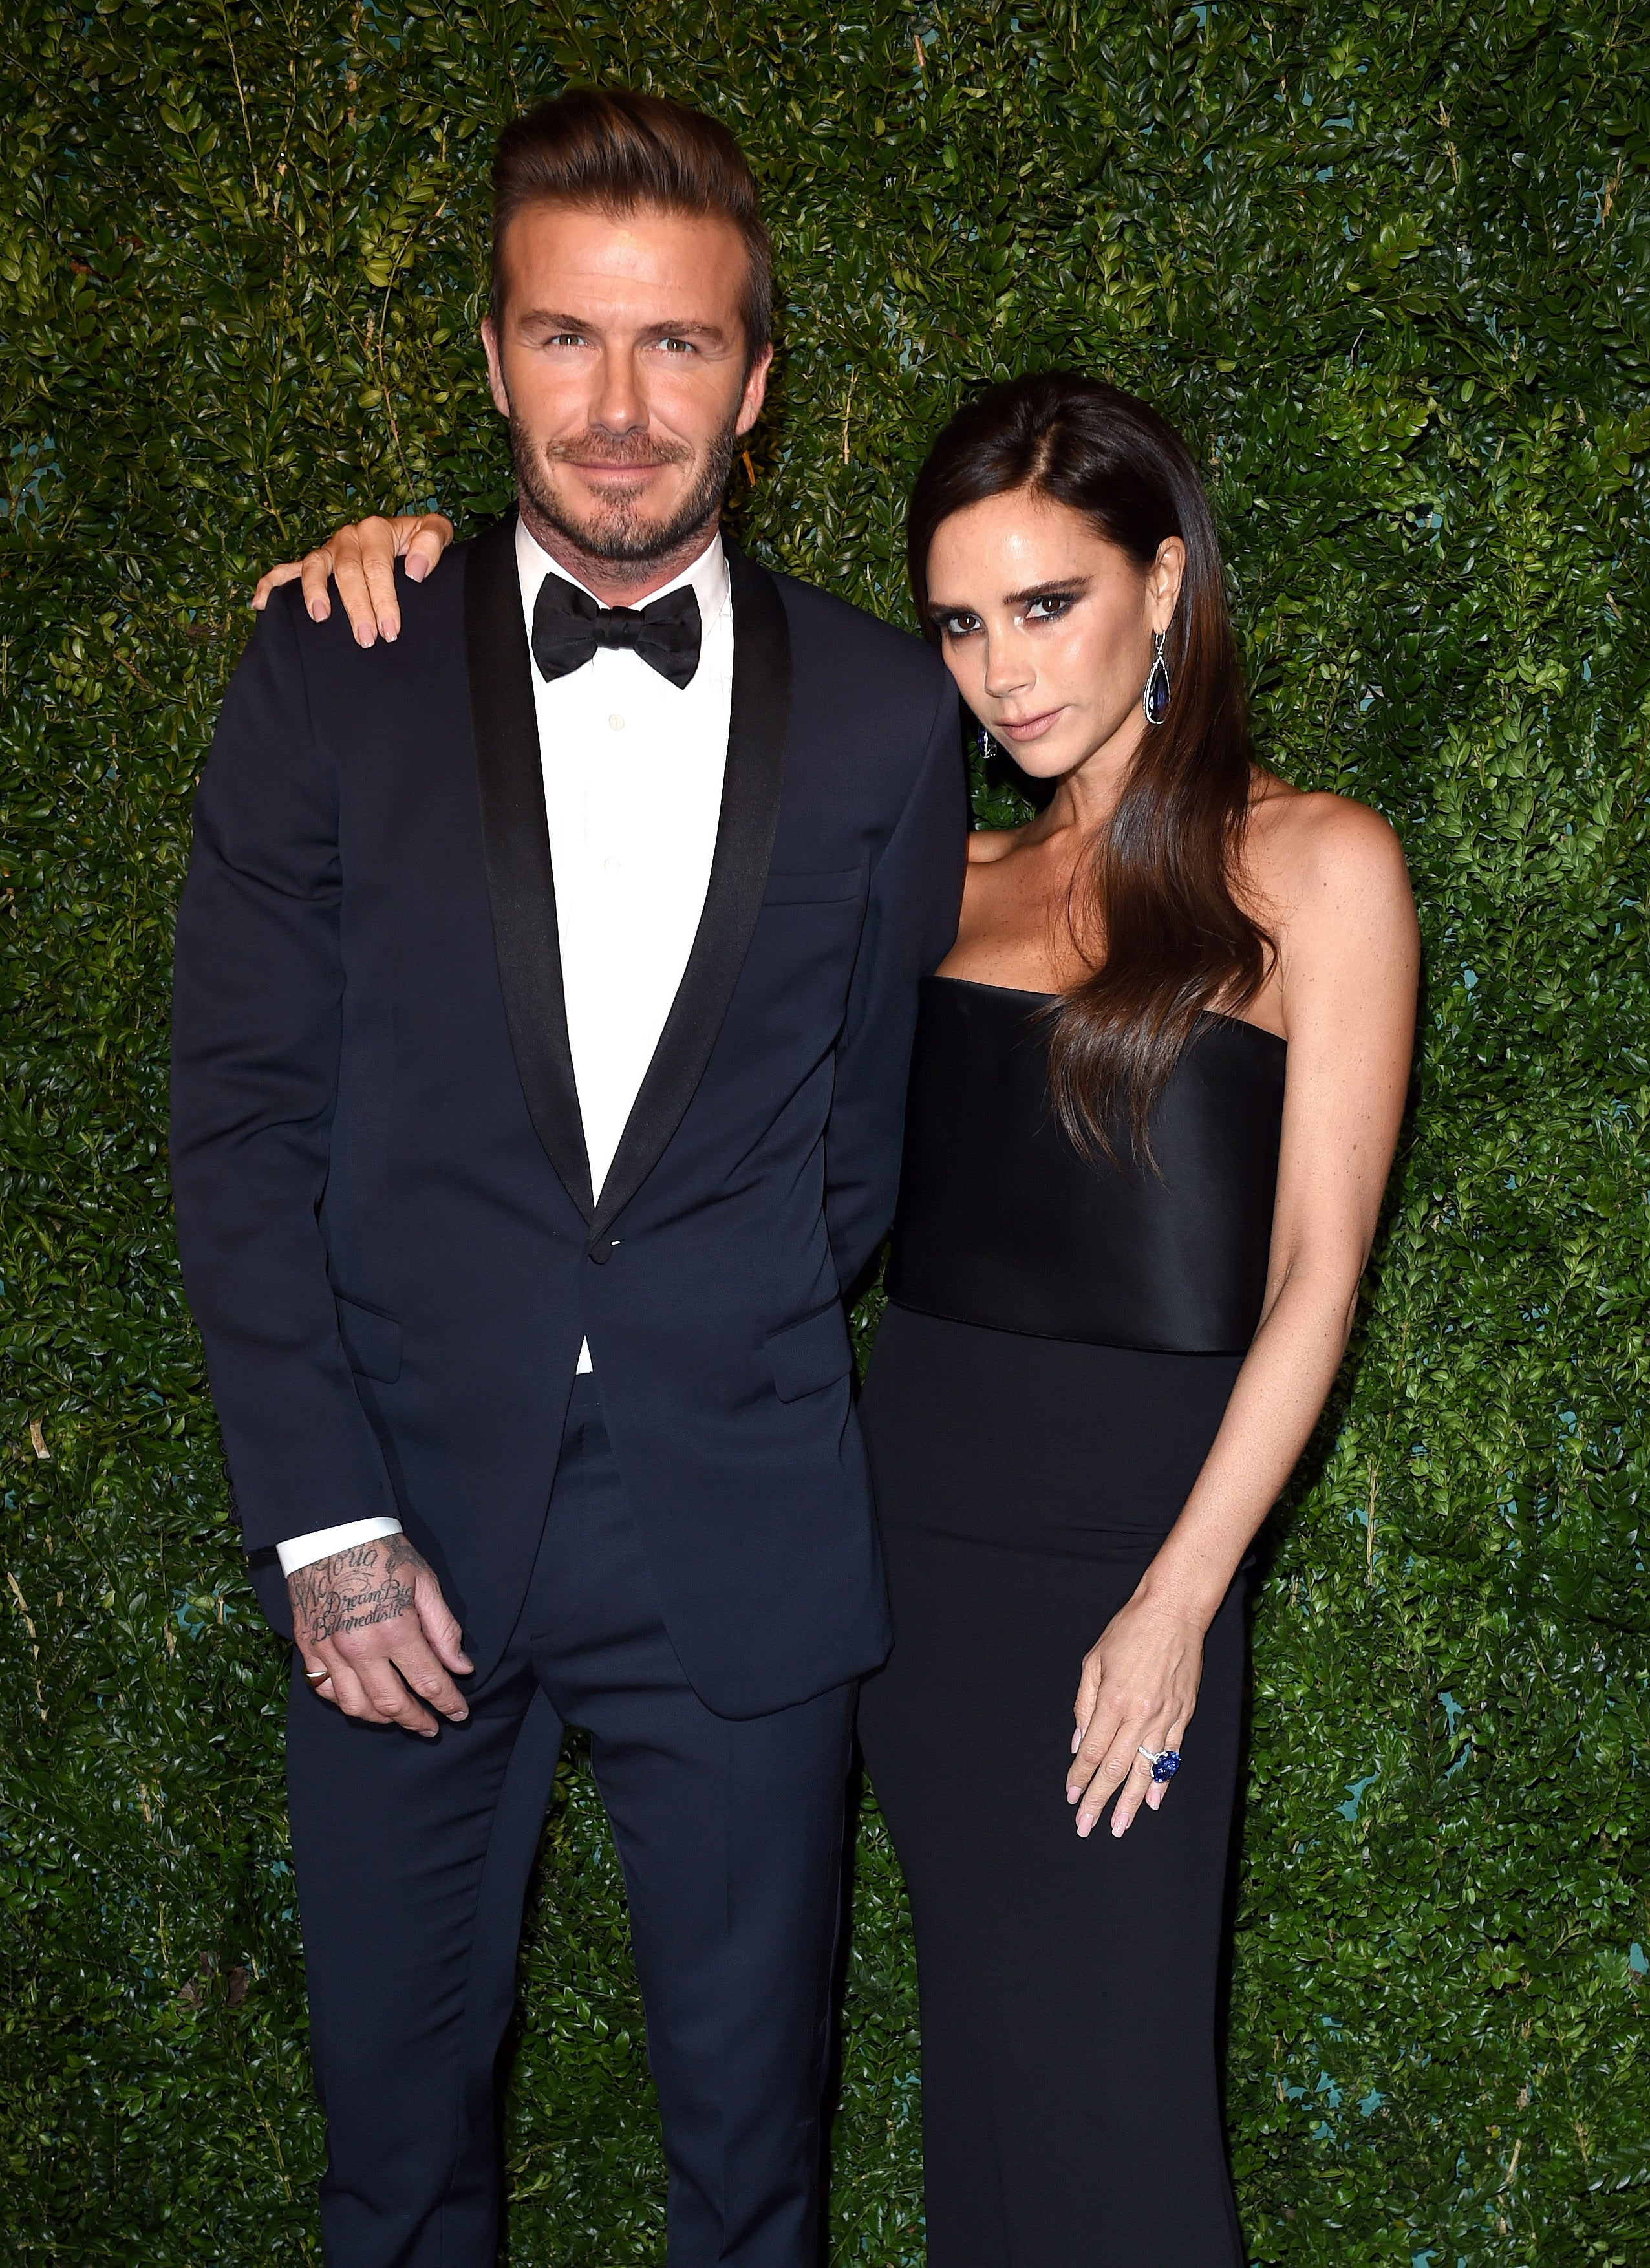 Posh and Becks: How David and Victoria turned their family into 'Brand  Beckham